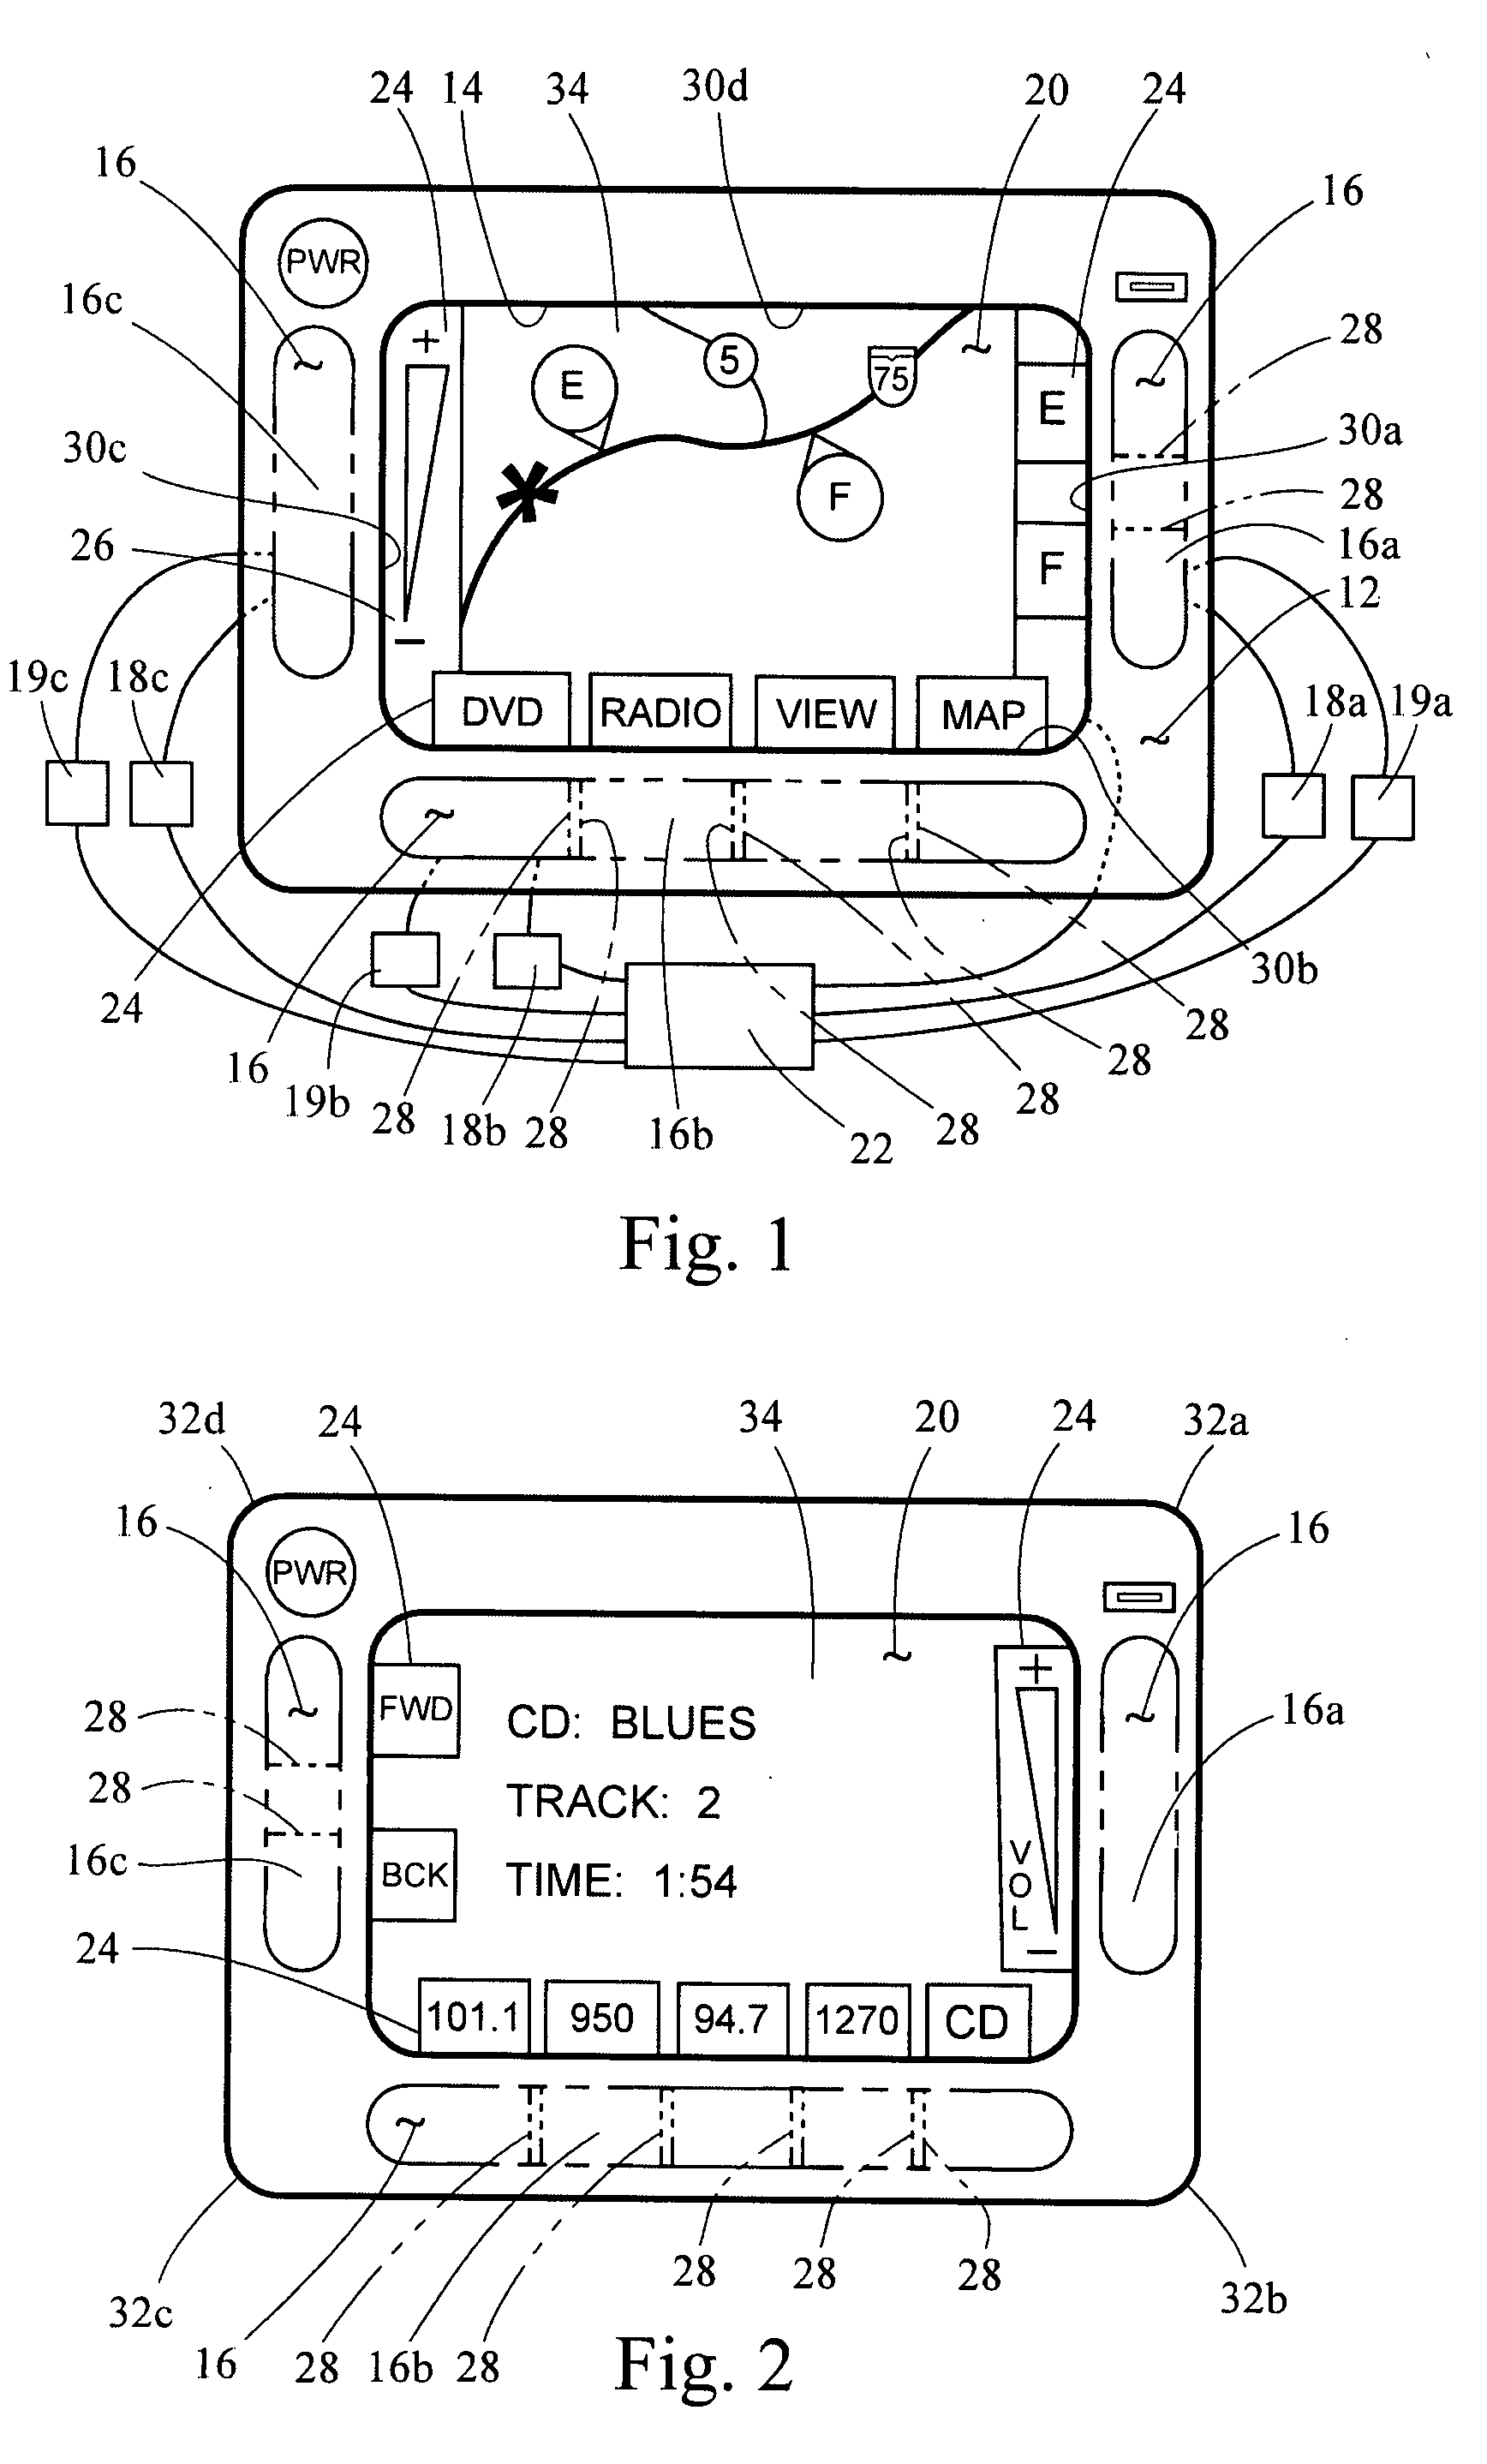 Touch control bezel for display devices